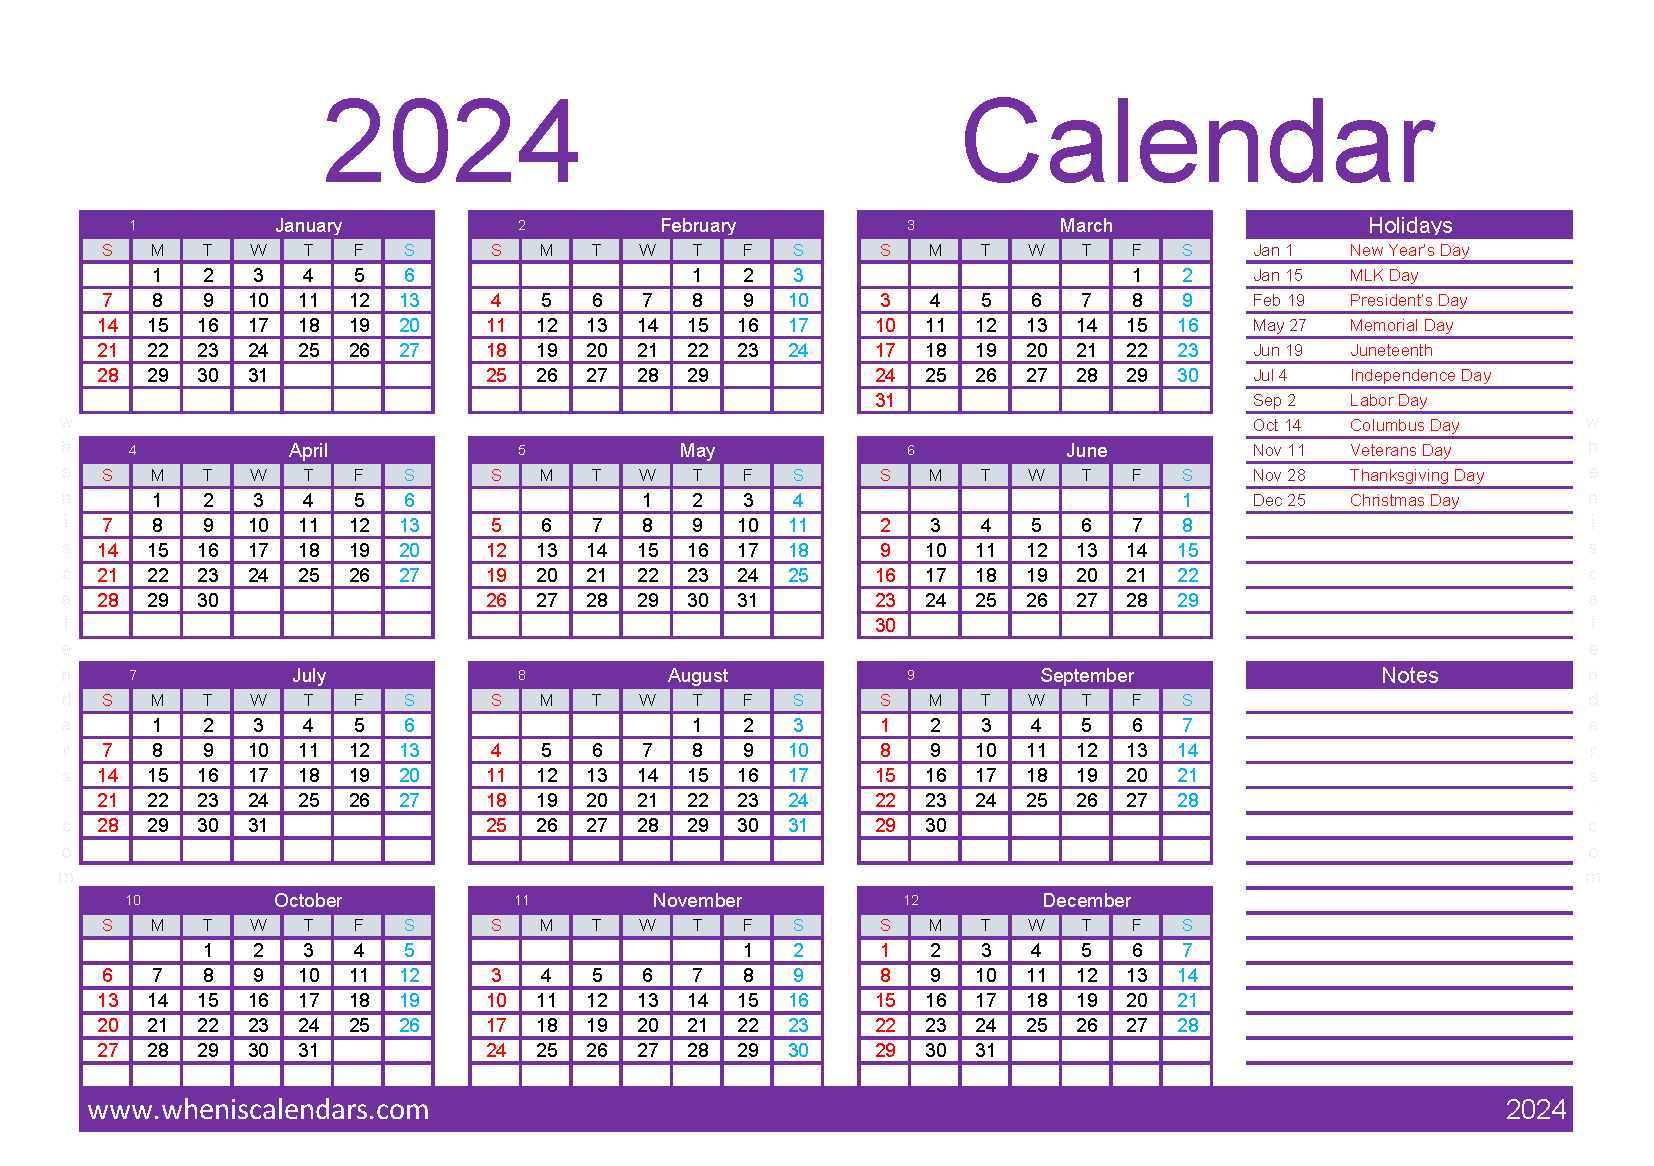 Download free Calendar 2024 with Holidays printable A5 in horizontal landscape